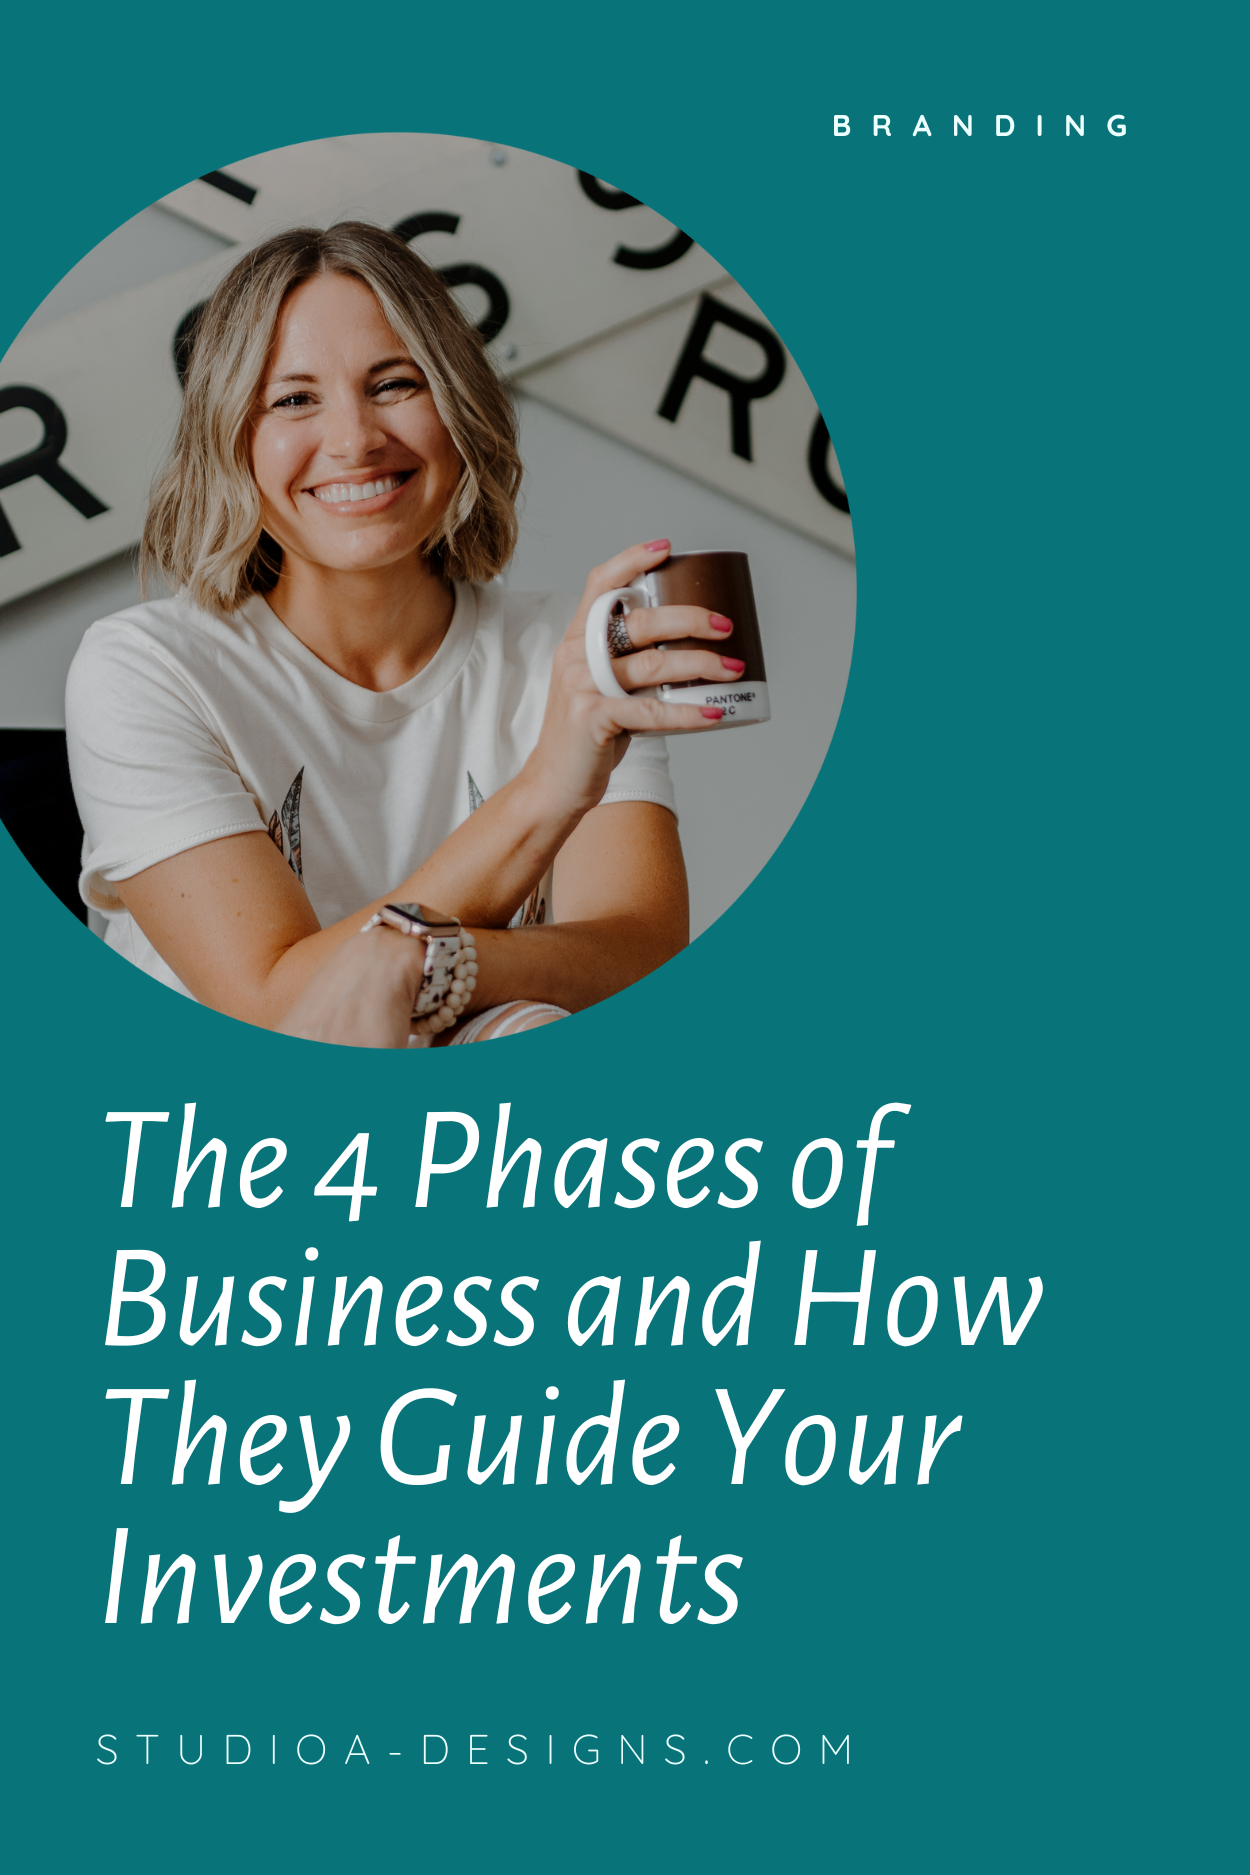 The 4 Phases of Business and How they Guide Your Investments